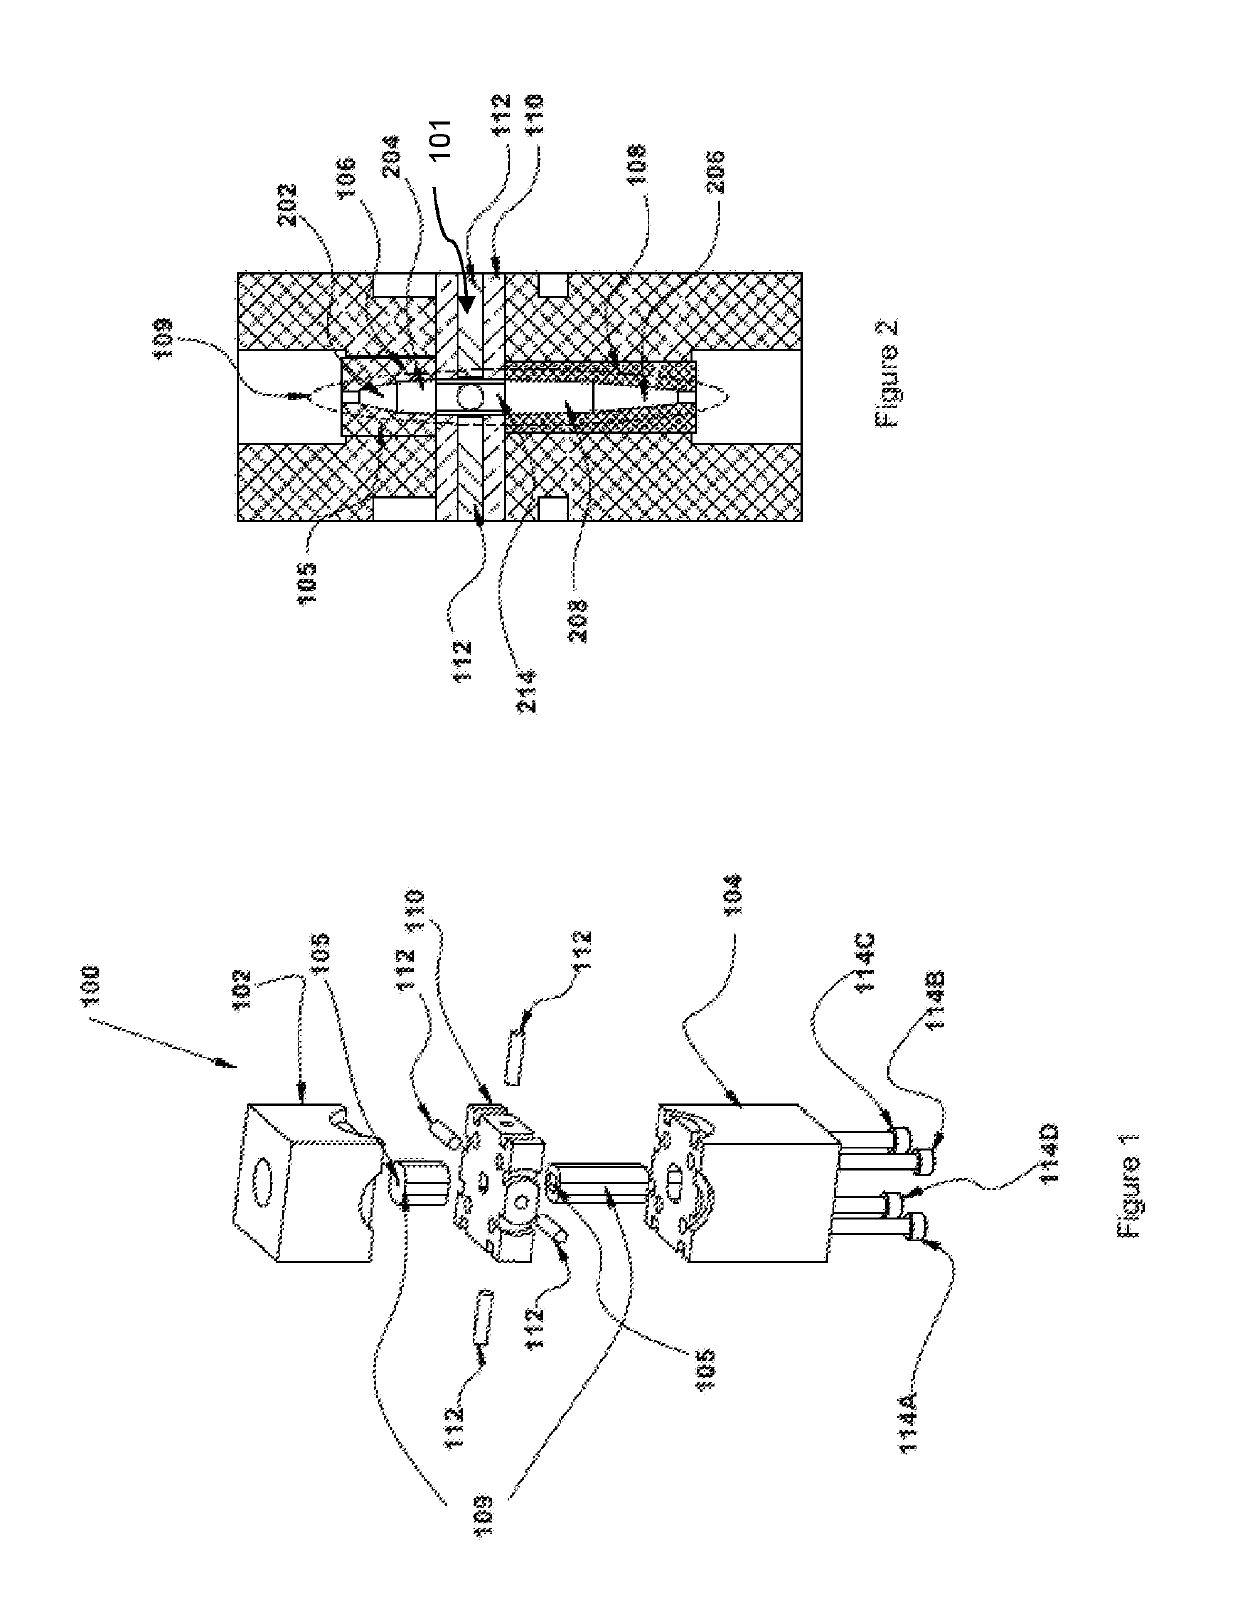 Flow cell and system for simultaneous measurement of absorbance and emission in a sample